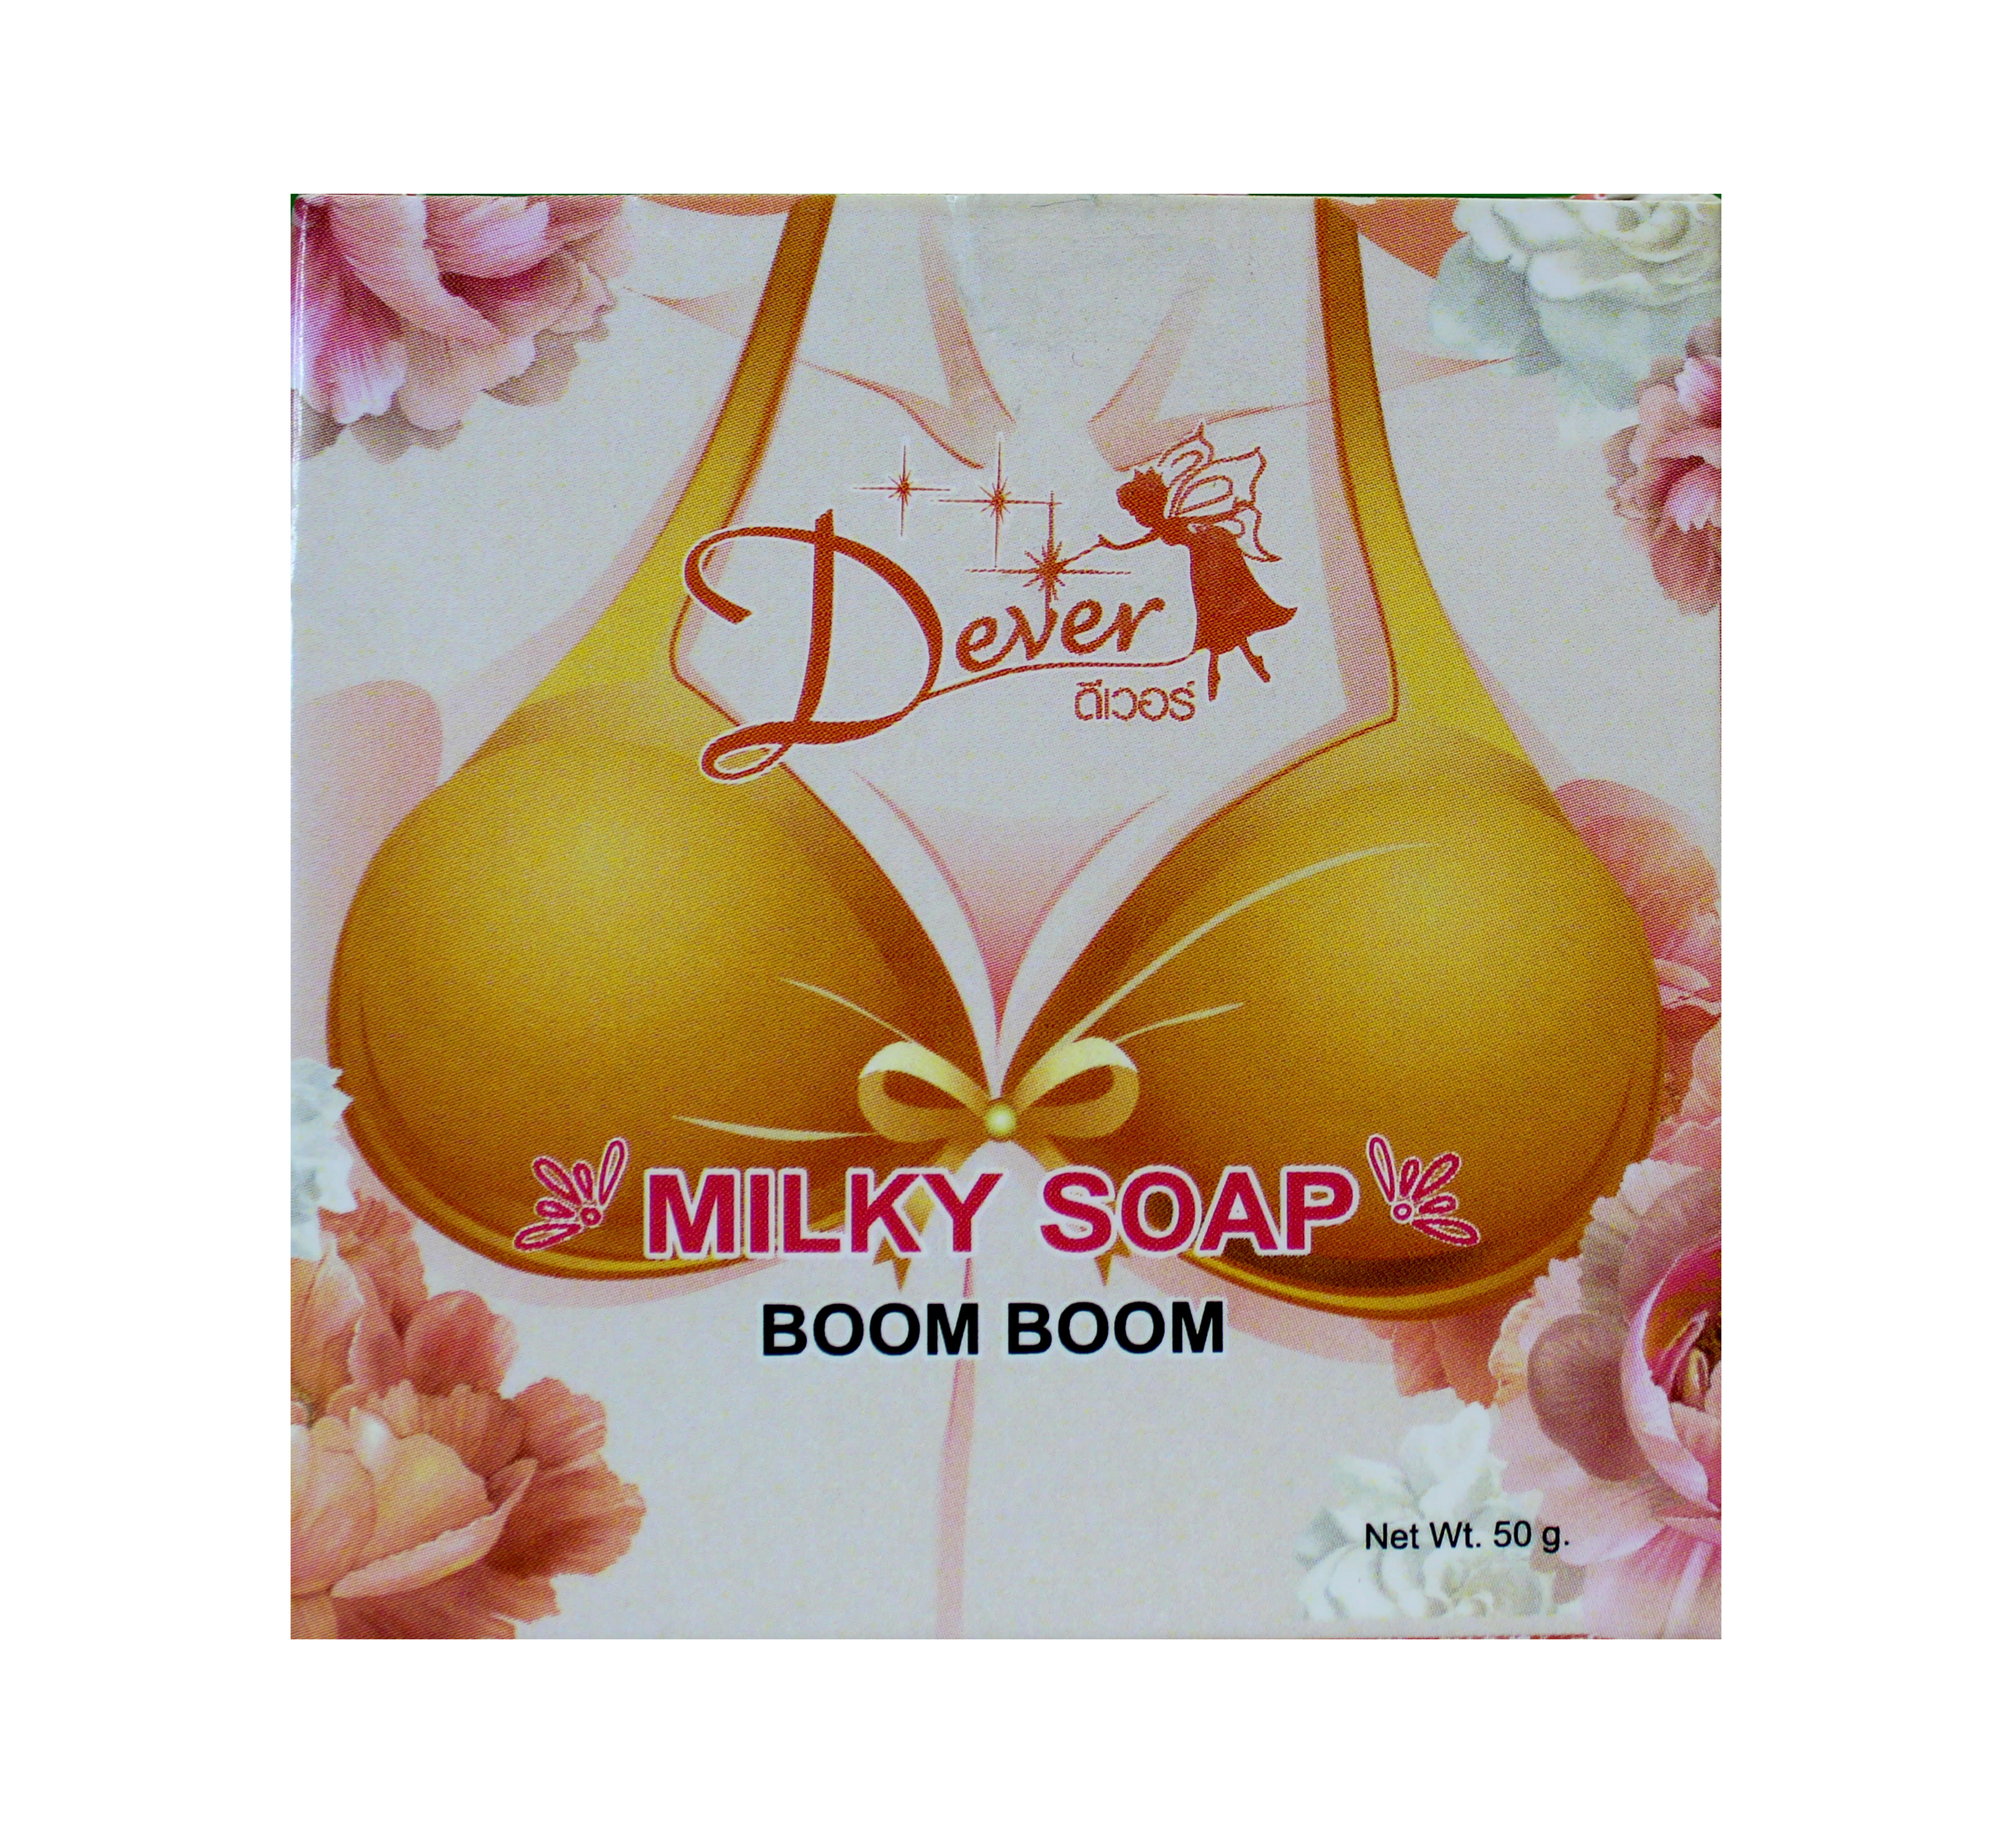 Milky Breast Enlargement Soap - Female Supplements - The King's Prod, LLC |  Supplements and Beauty in Saint Paul